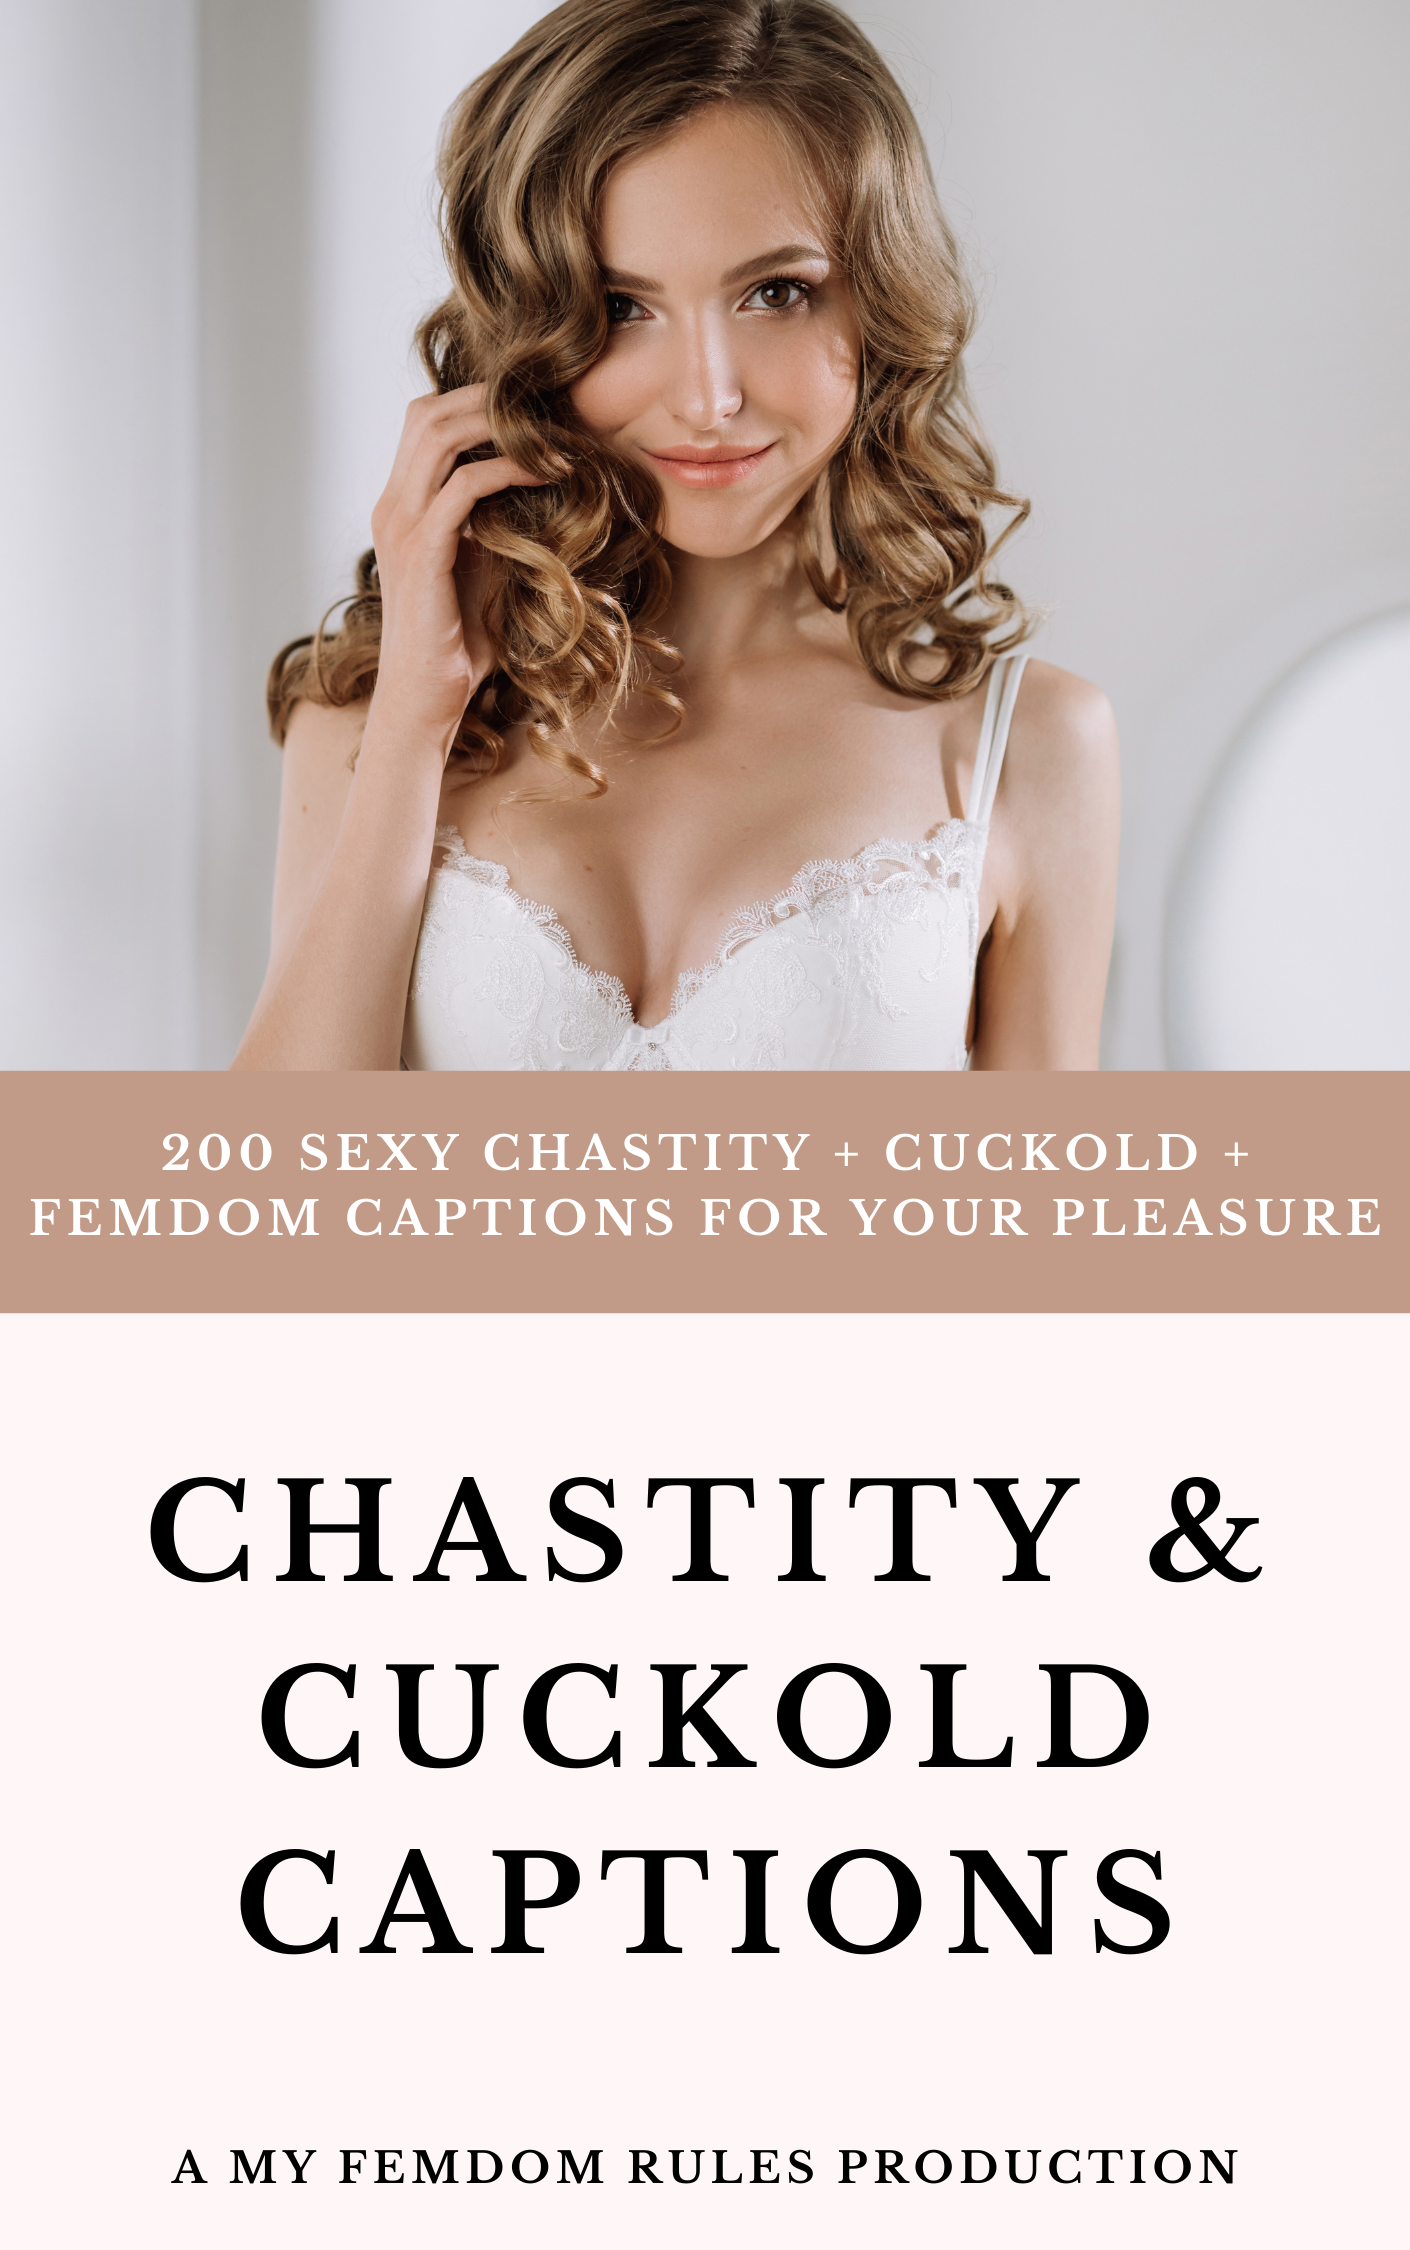 Chastity and Cuckold Captions Book (PDF)